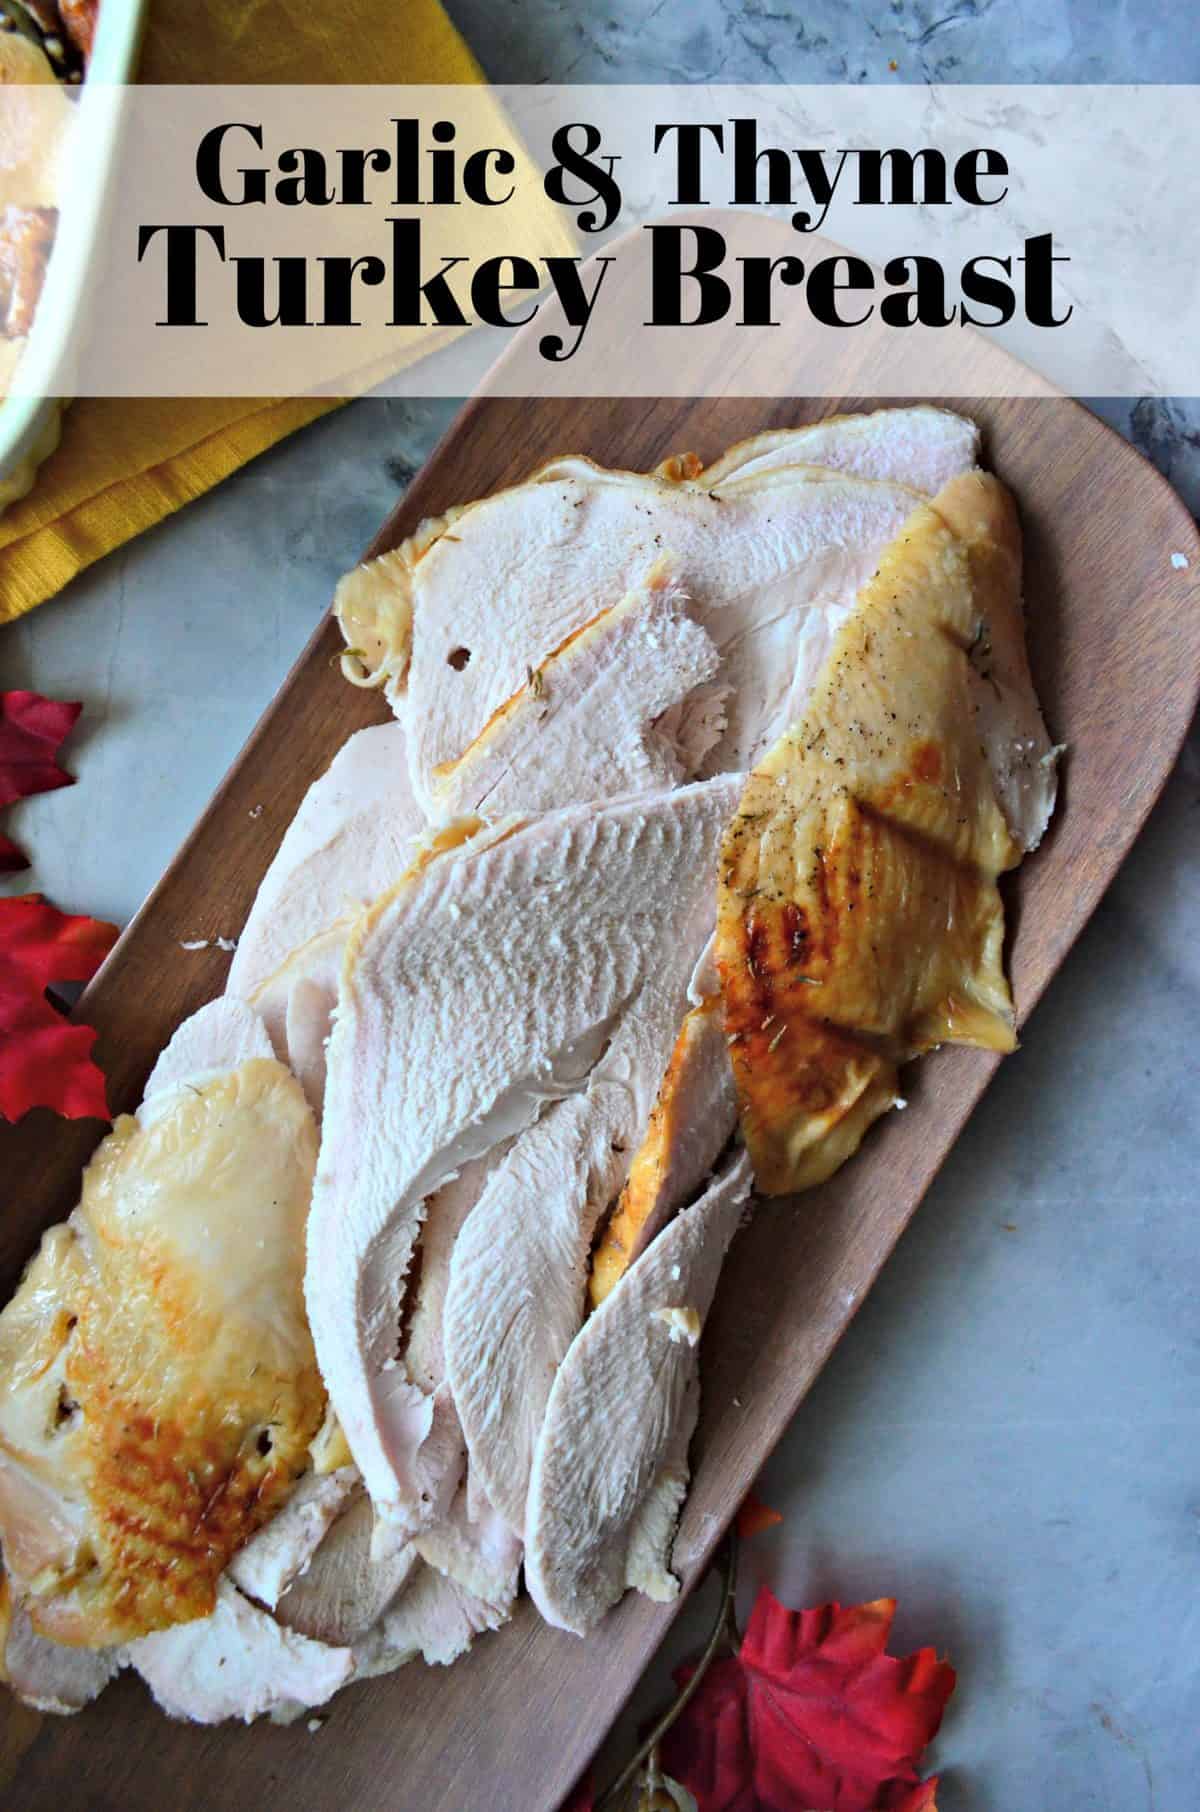 sliced Garlic & Thyme Turkey Breast on wooden cutting board with title text.